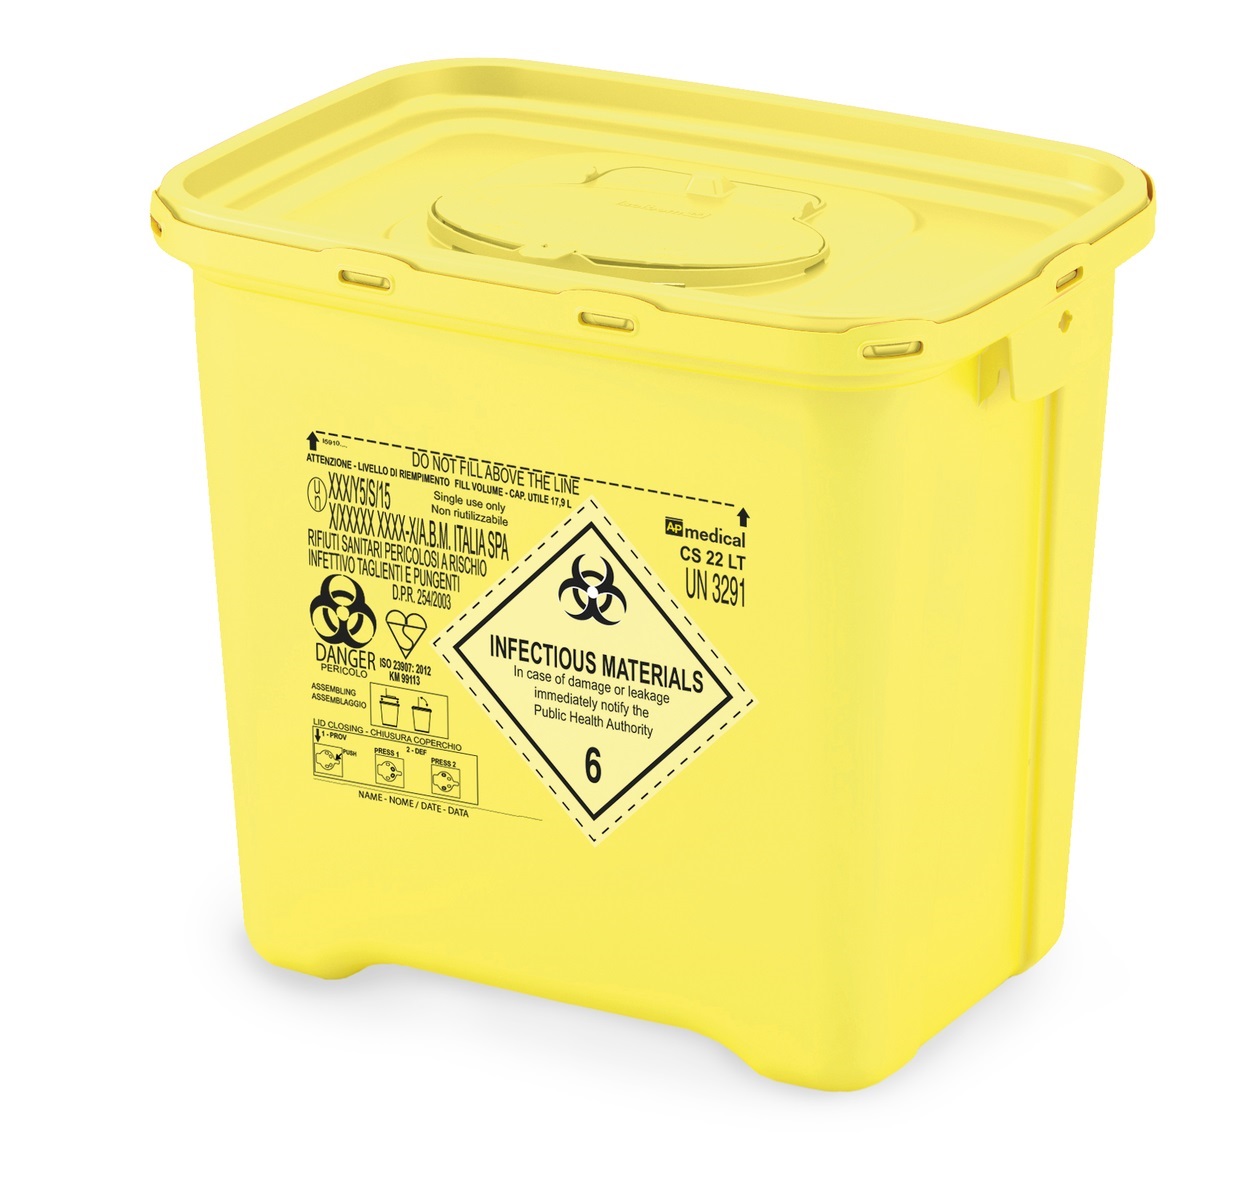 Waste Bin Infectious waste single use box set are Equipment perfect for keeping almost all viruses out can also be customised using Printing in sizes 50L owing to small supplies the final product may look different than picture.